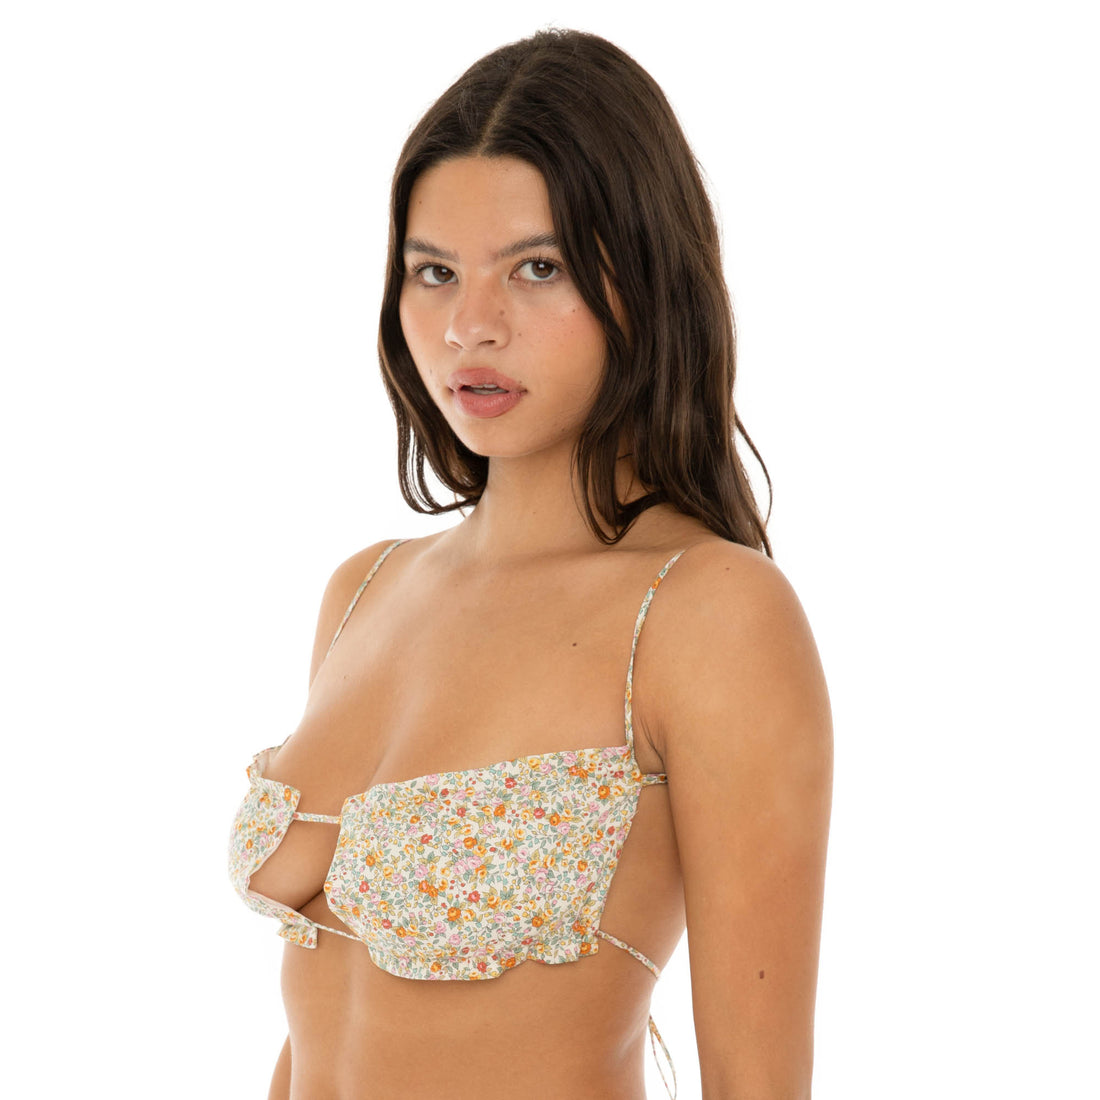 Are You Am I - Lyss Bra **floral